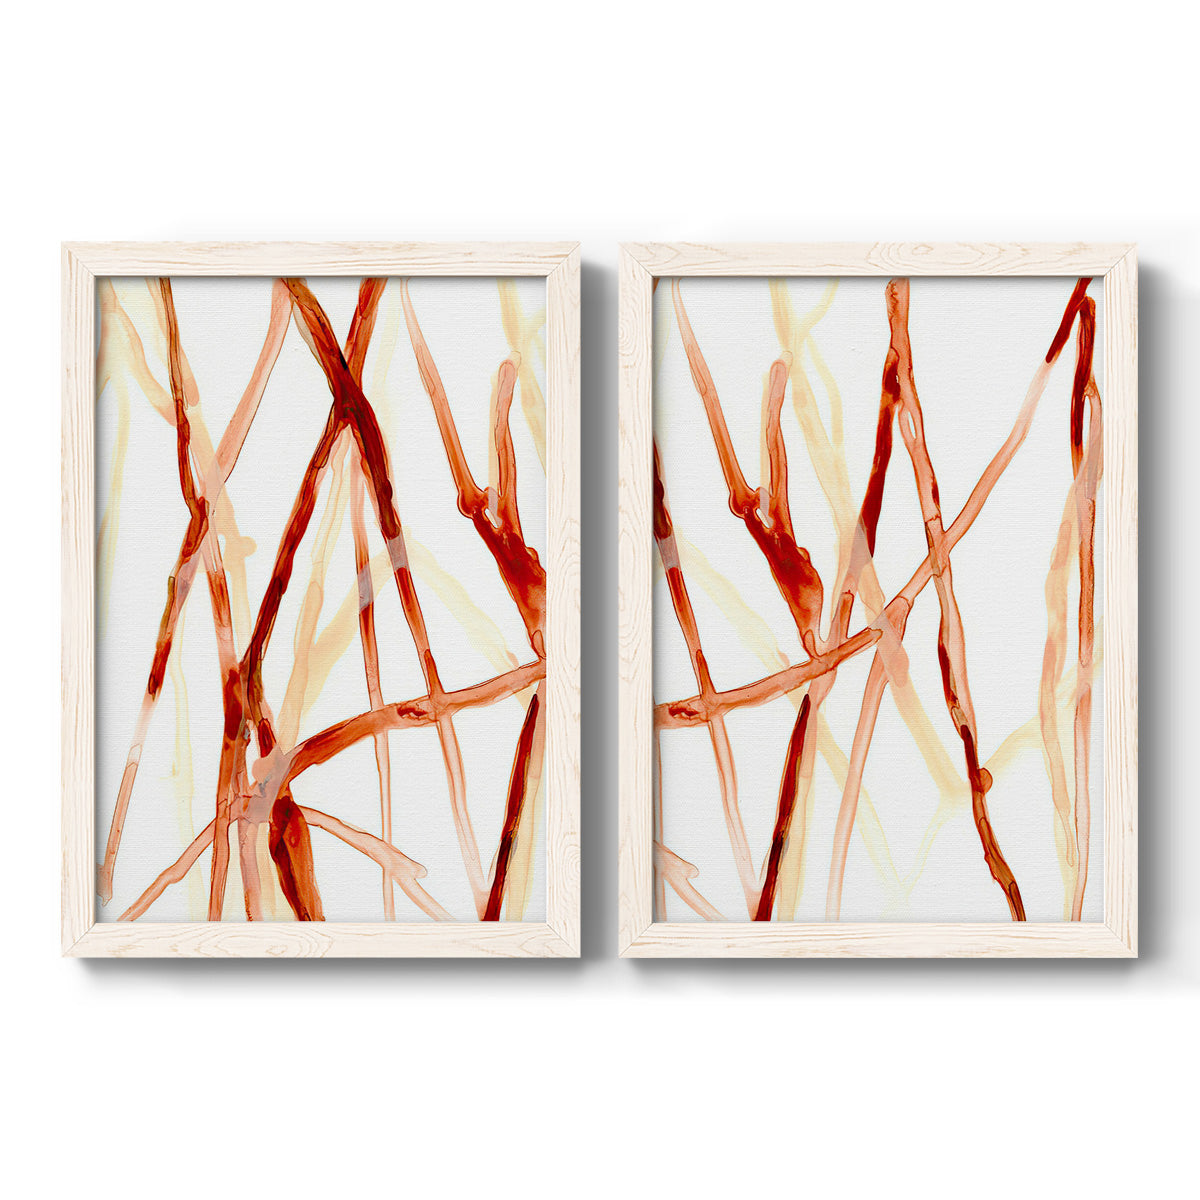 Runnel V - Premium Framed Canvas 2 Piece Set - Ready to Hang